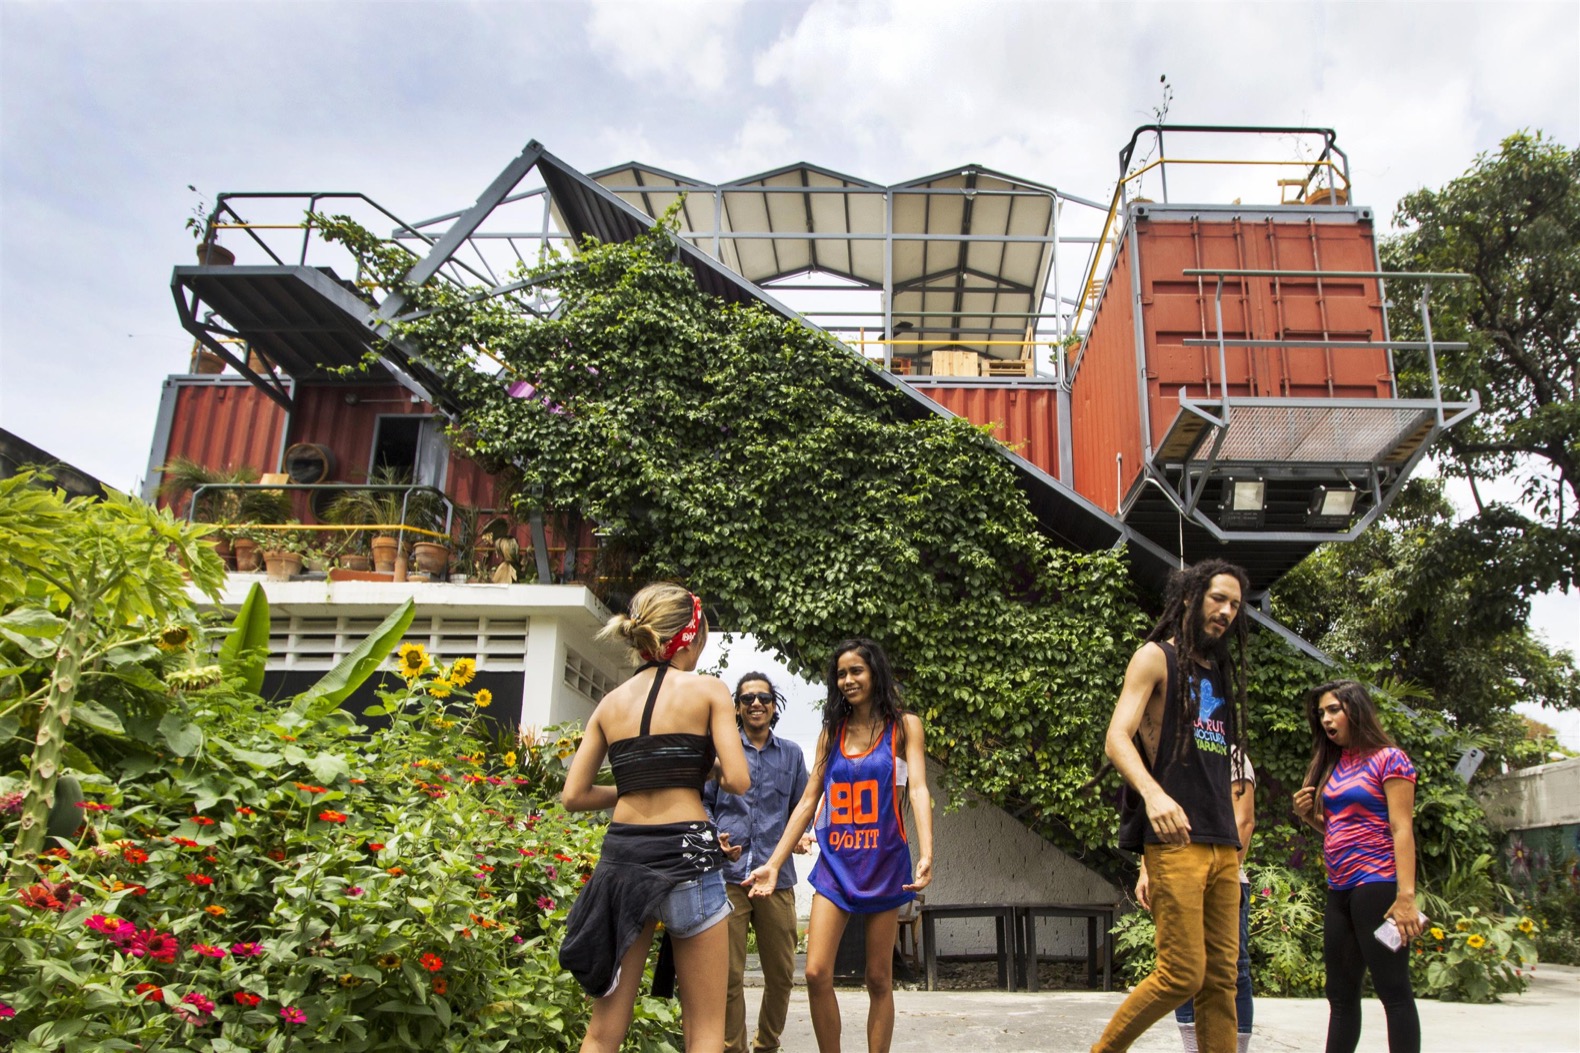 People near innovative container architecture with greenery.